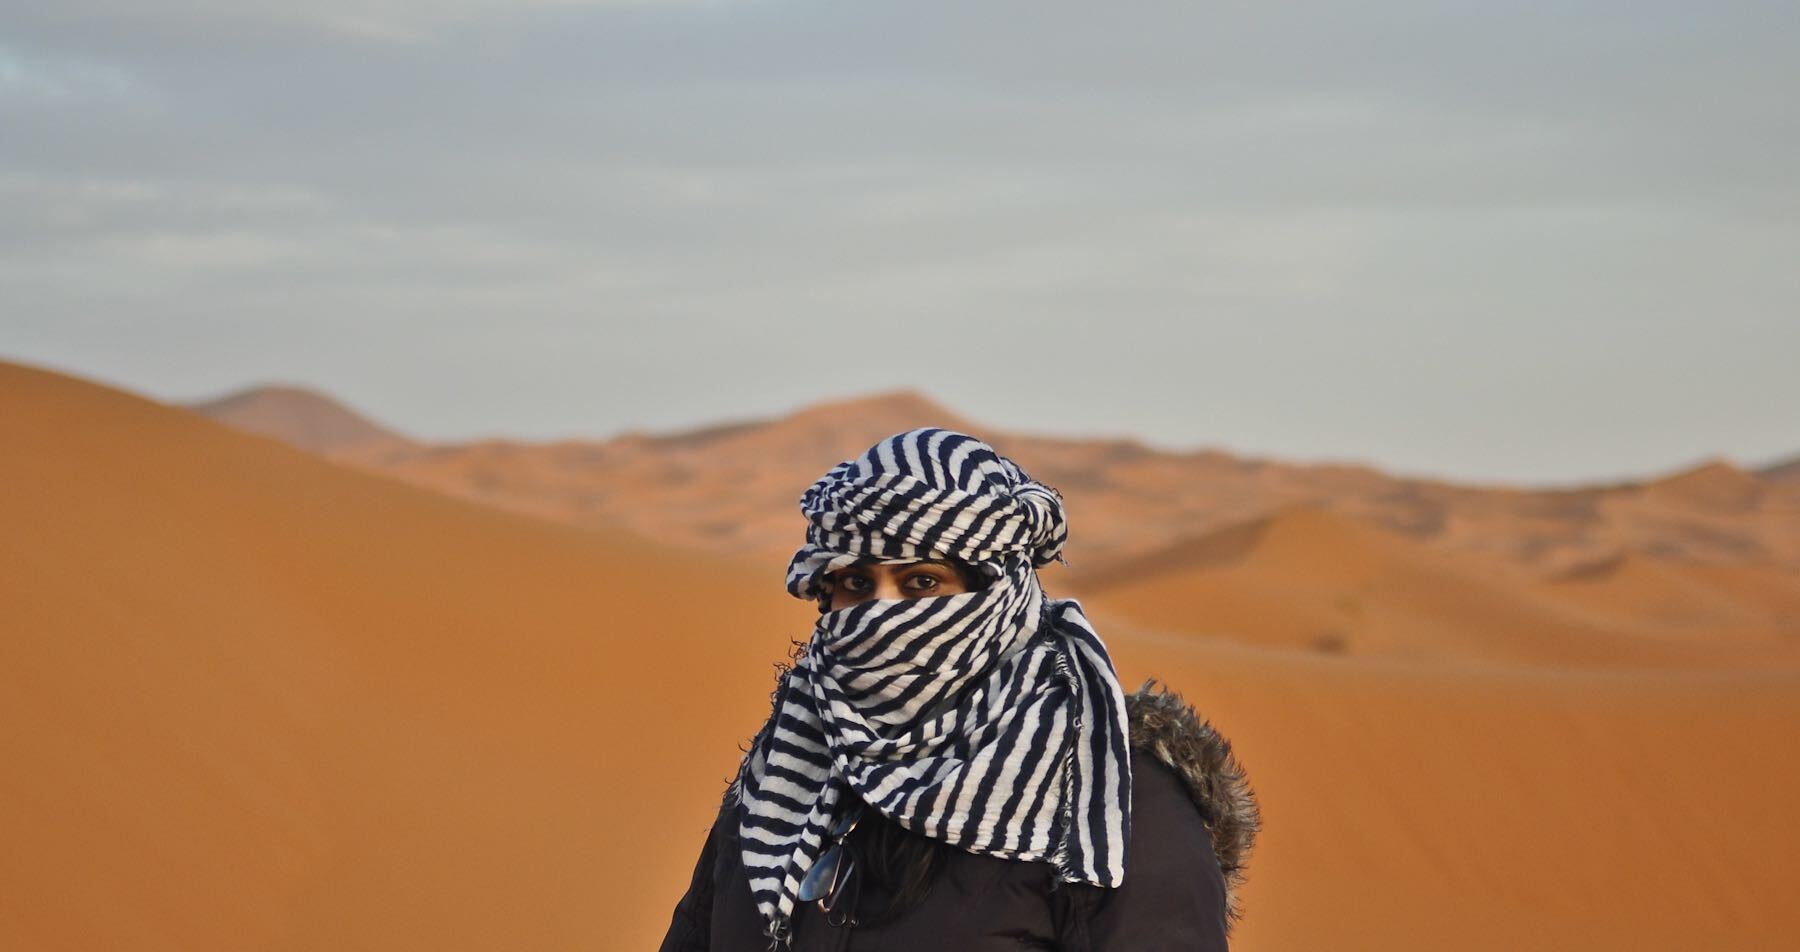 Maduri Asokan, an Indian woman, stands in the desert wearing a black-and-white striped headscarf.